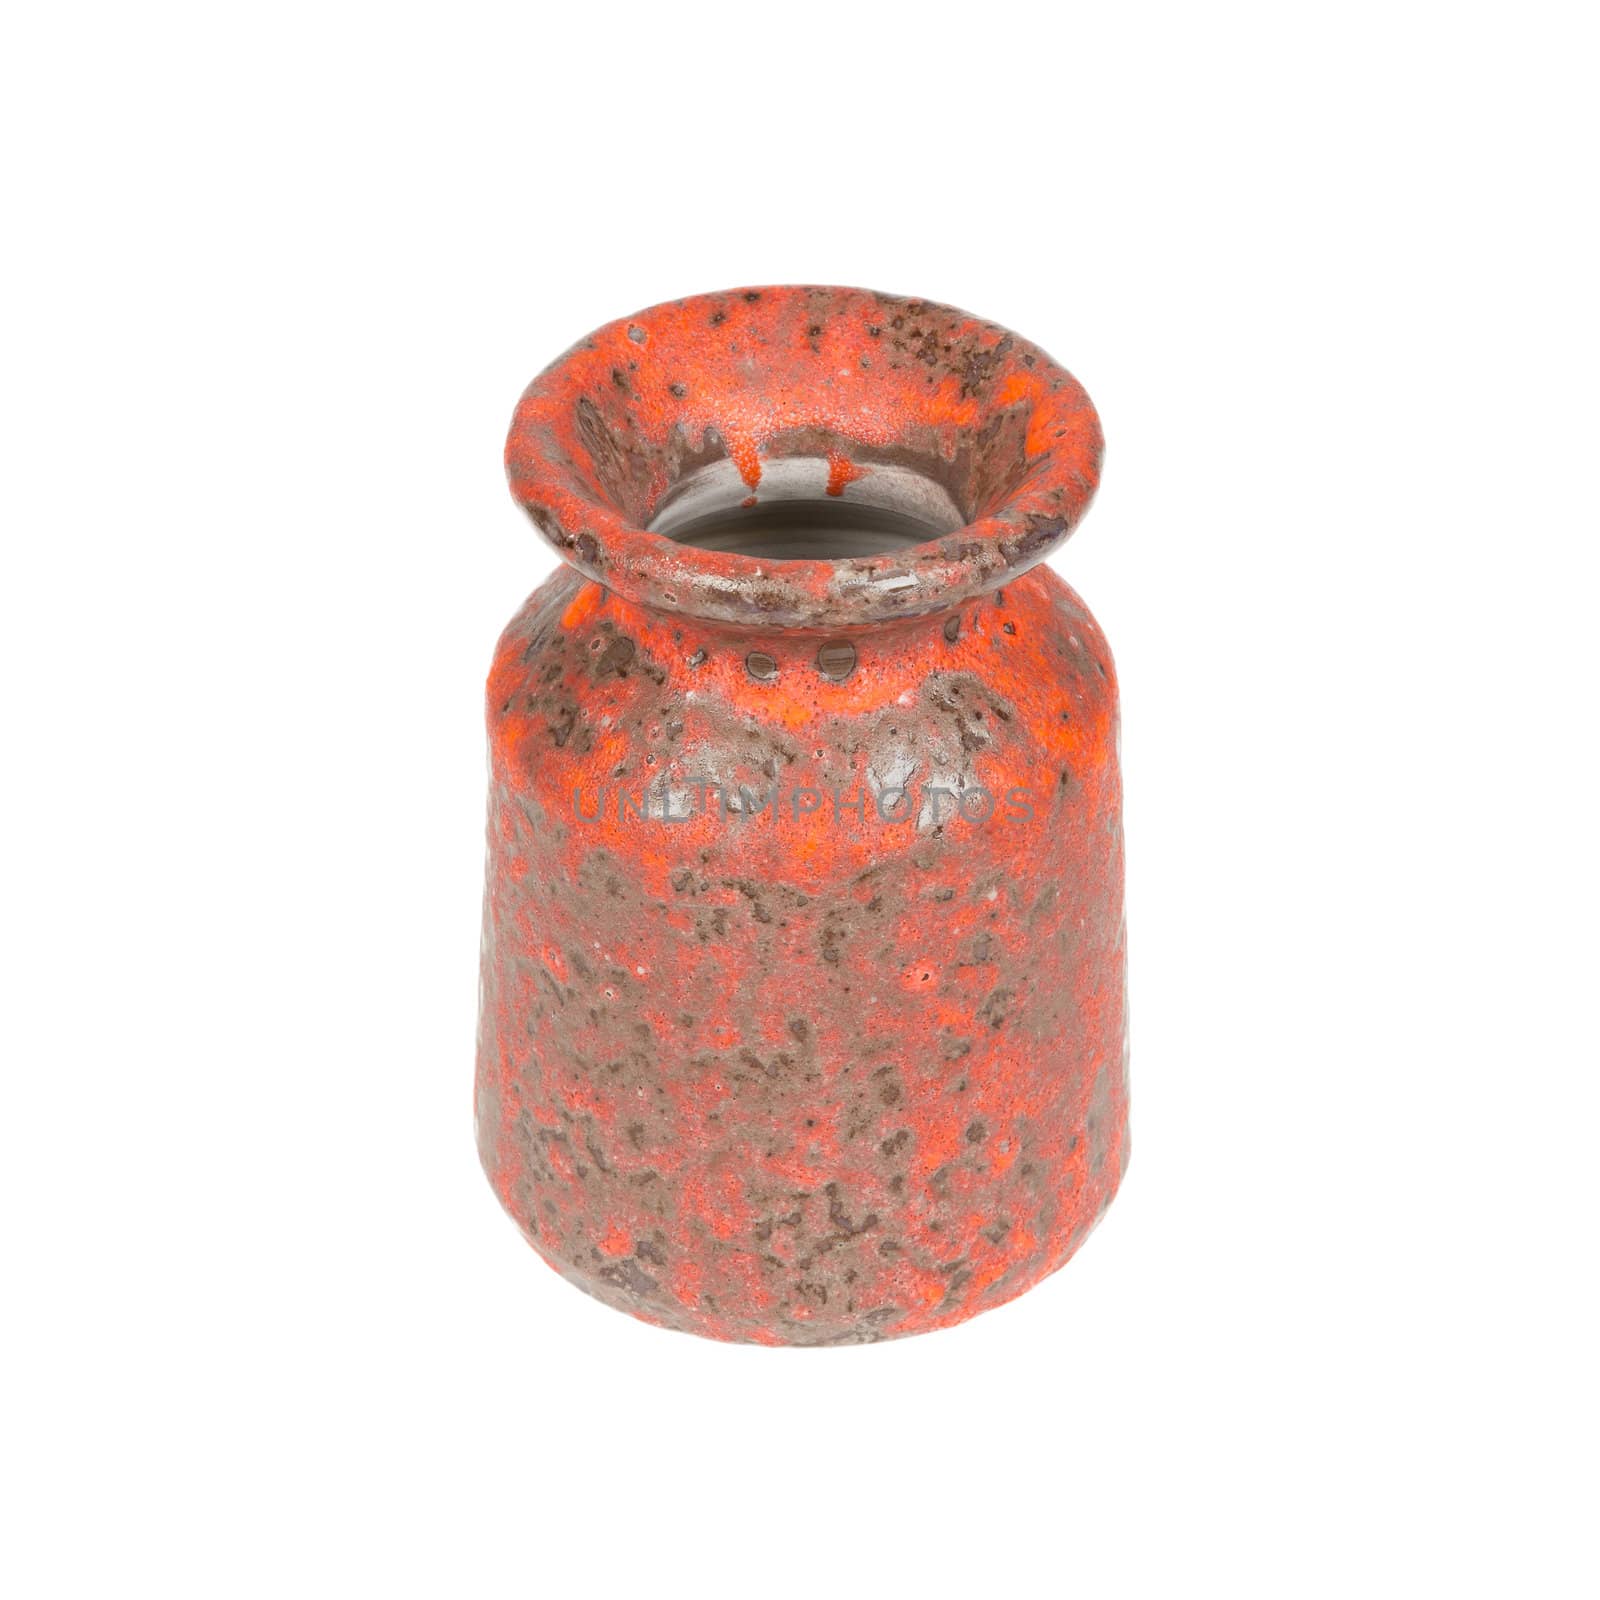 Old red vase from clay, the handwork by michaklootwijk